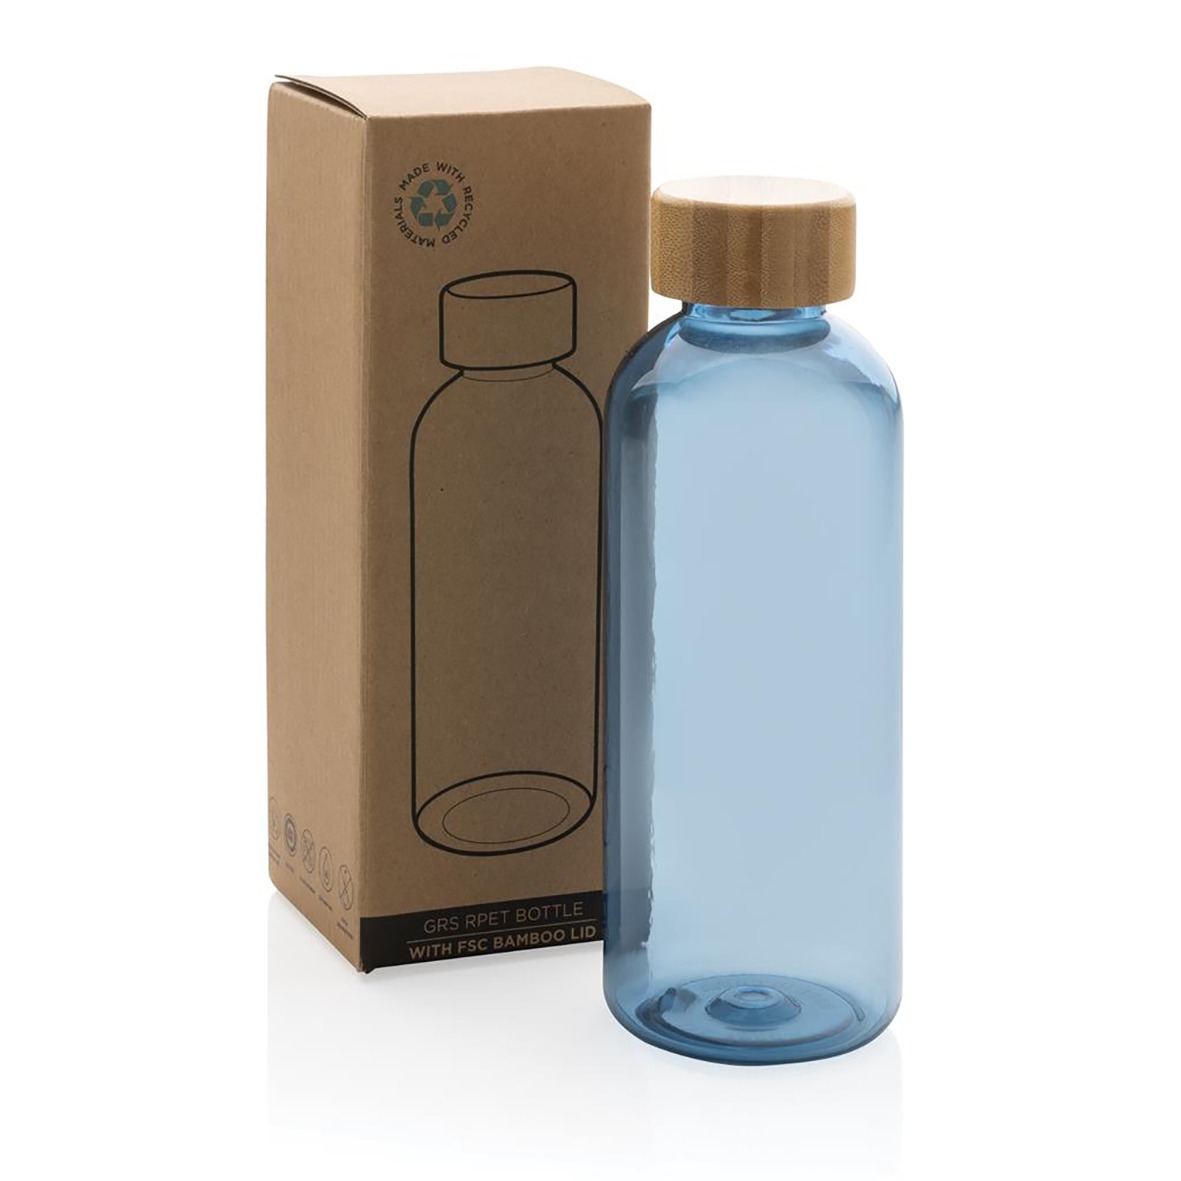 Bouteille eau recycle bambou personnalise-1